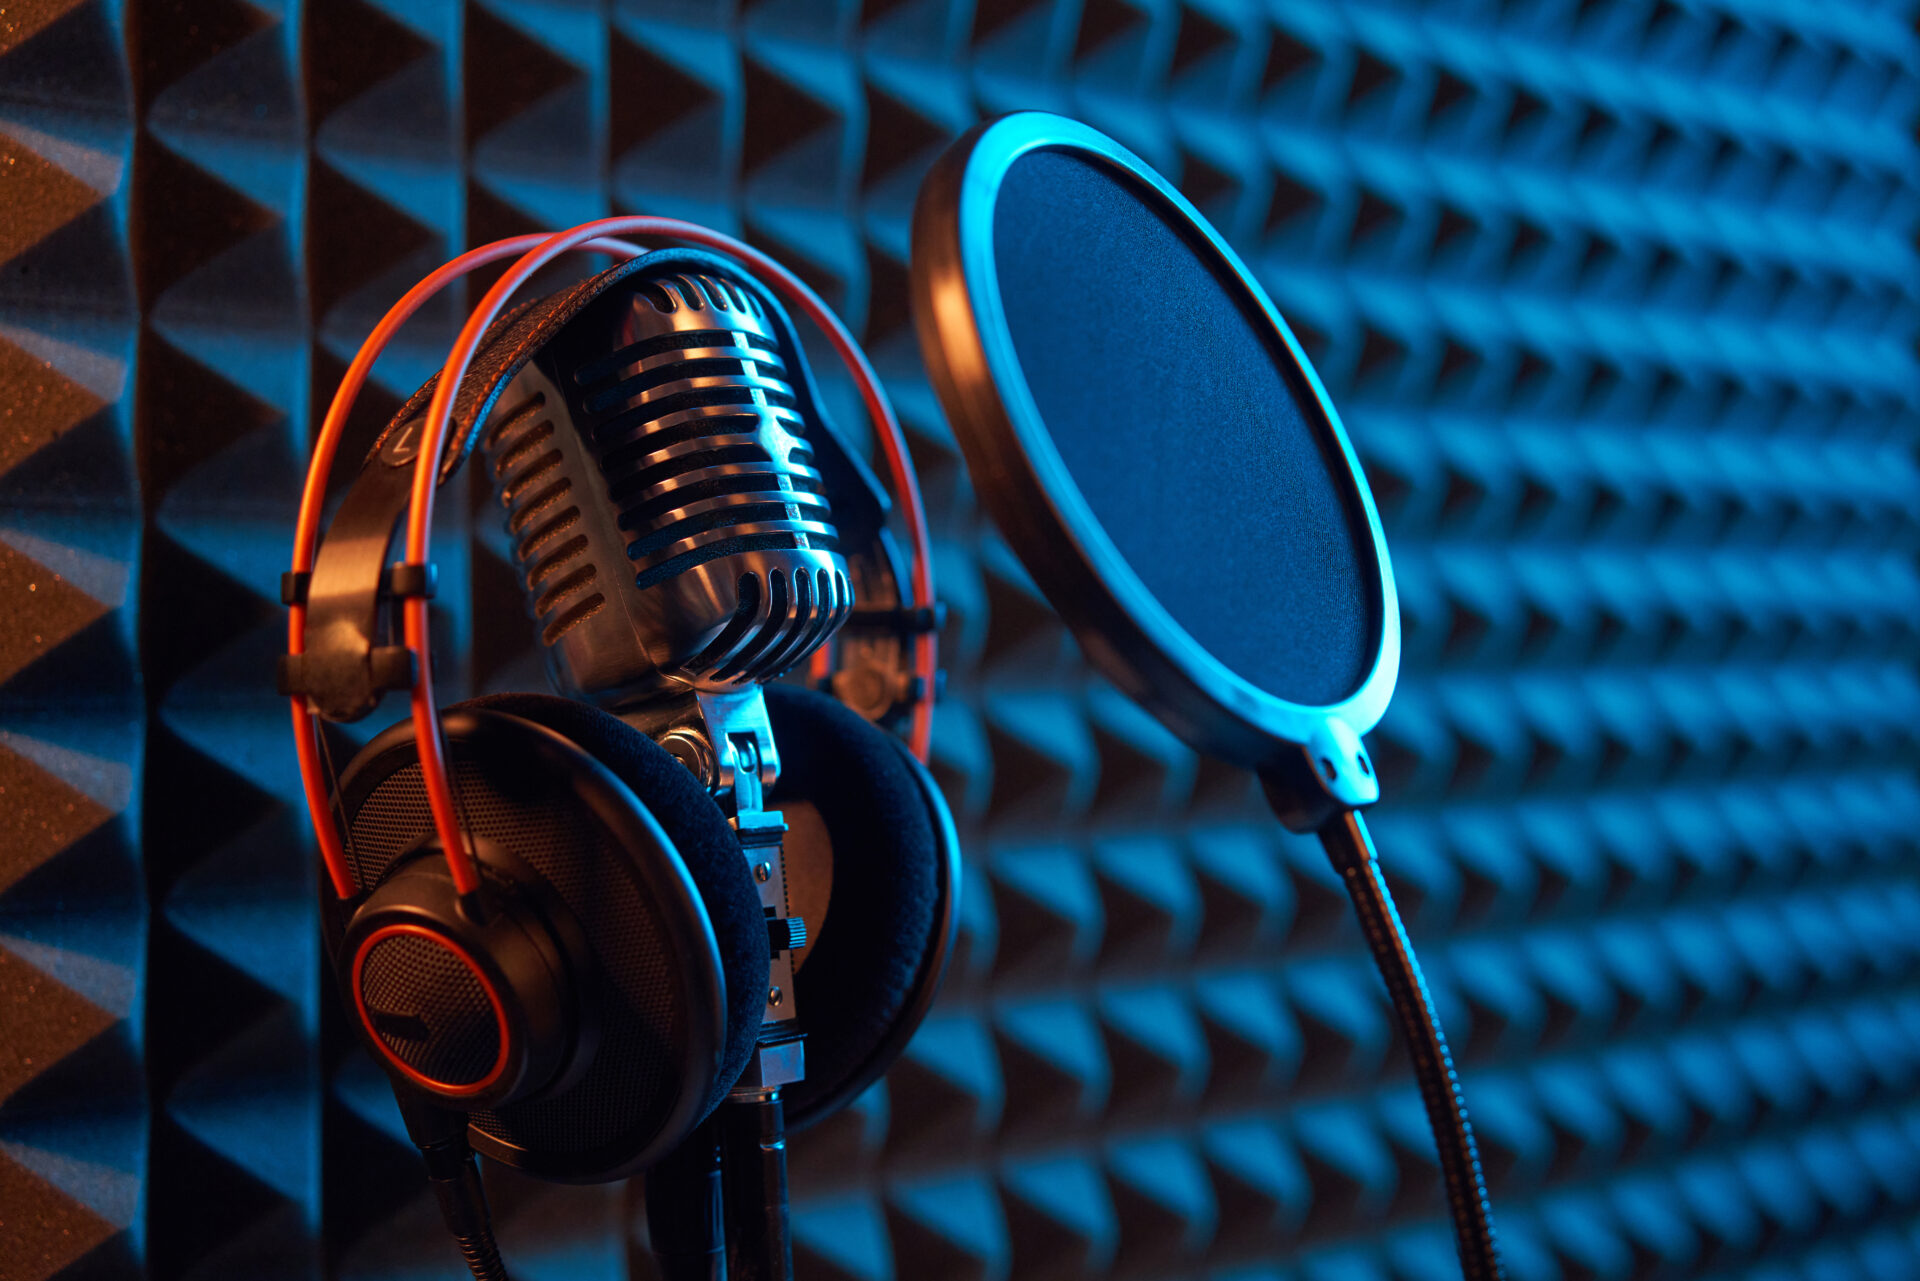 Studio condenser microphone with professional headphones and pop-up filter, on acoustic foam panel background with orange side light, copy space on right